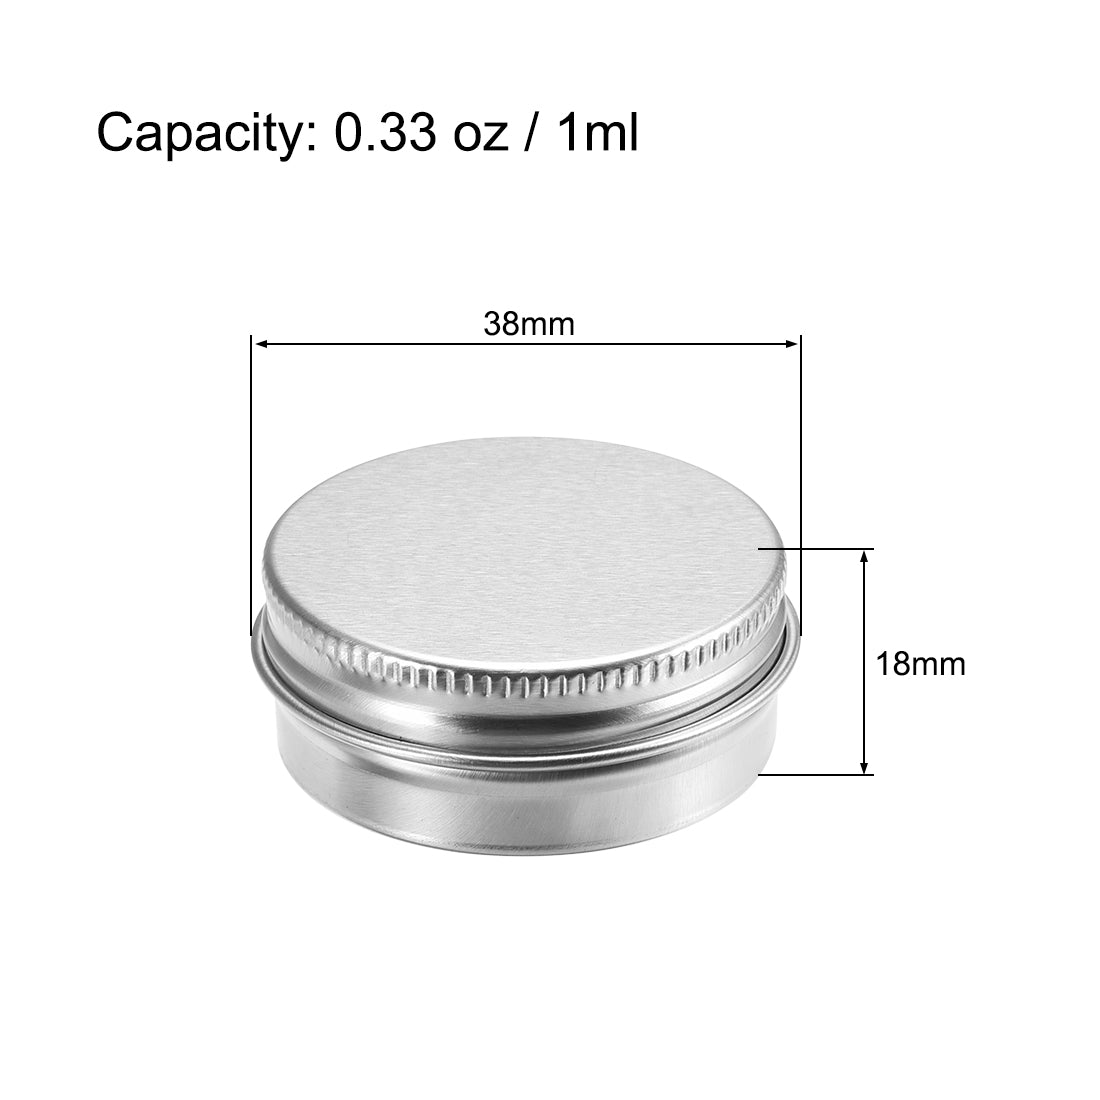 uxcell Uxcell 0.33 oz Round Aluminum Cans Tin Can Screw Top Metal Lid Containers 1ml, 3pcs